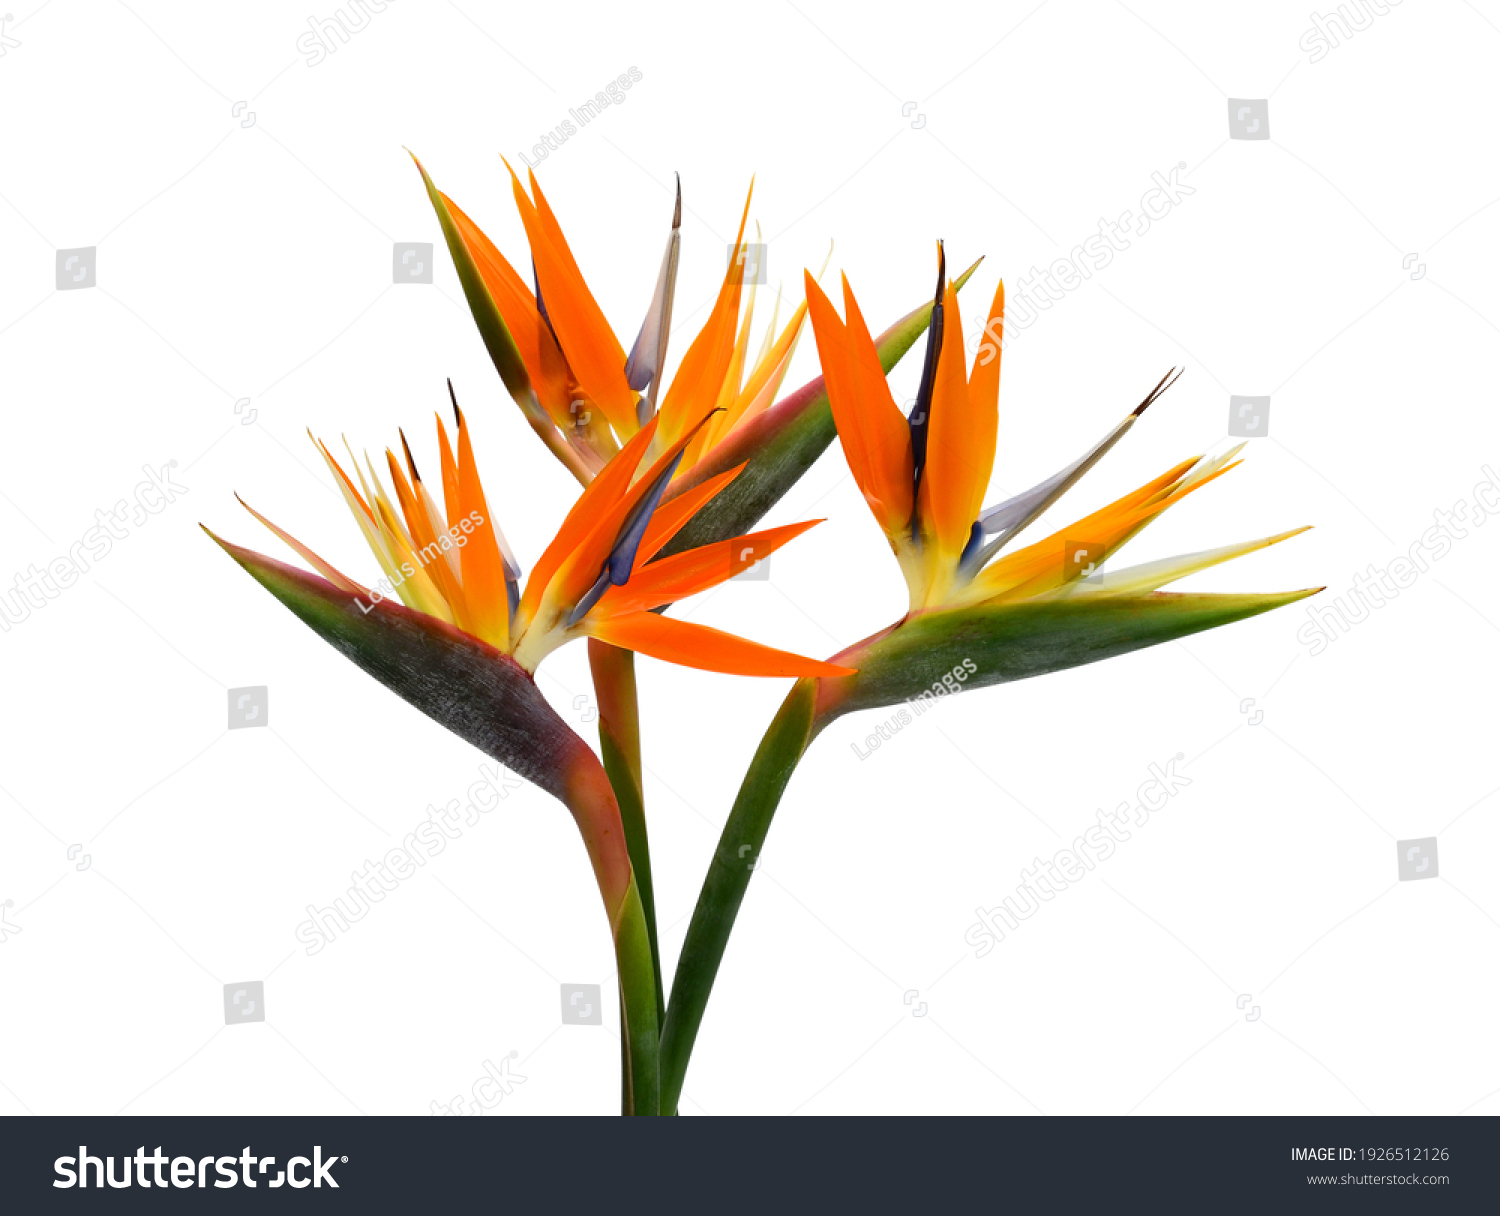 beautiful bouquet of flowers bird of paradise on a white background #1926512126